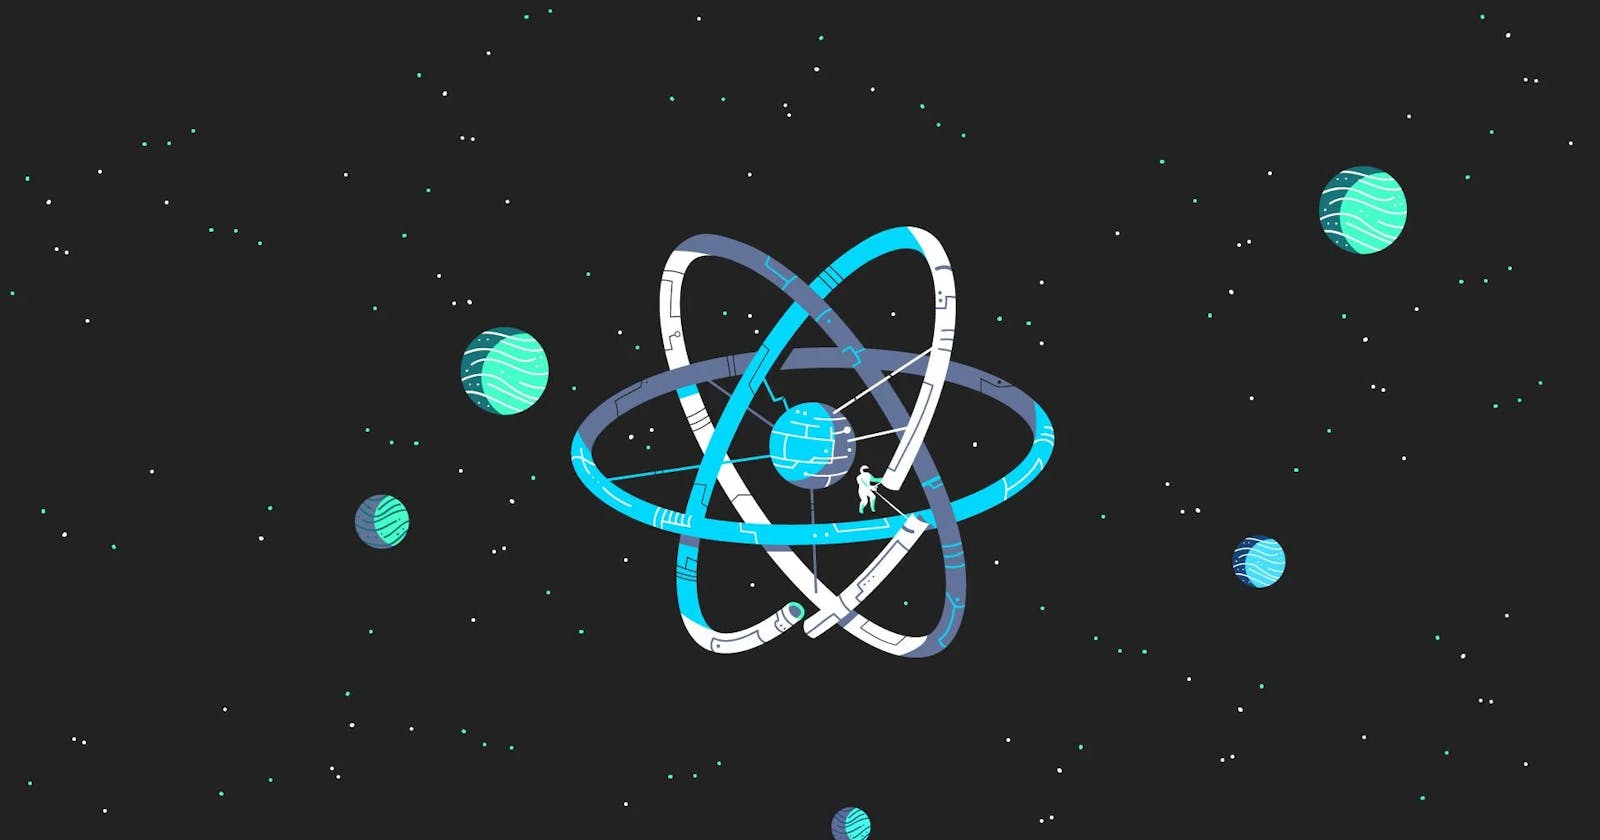 All you need to know to start working with react